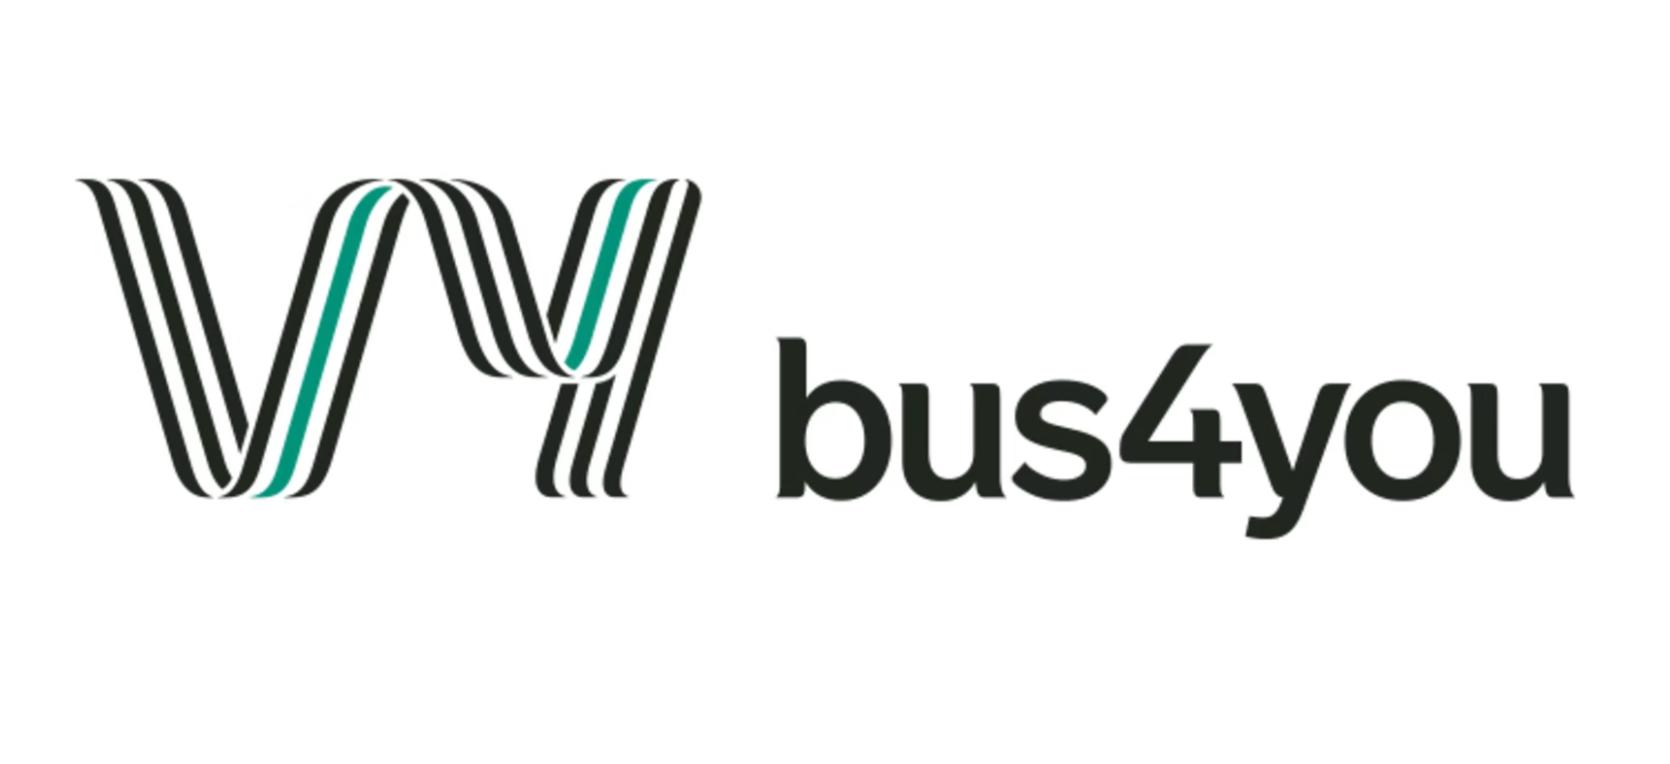 Logo of Vy Bus4you